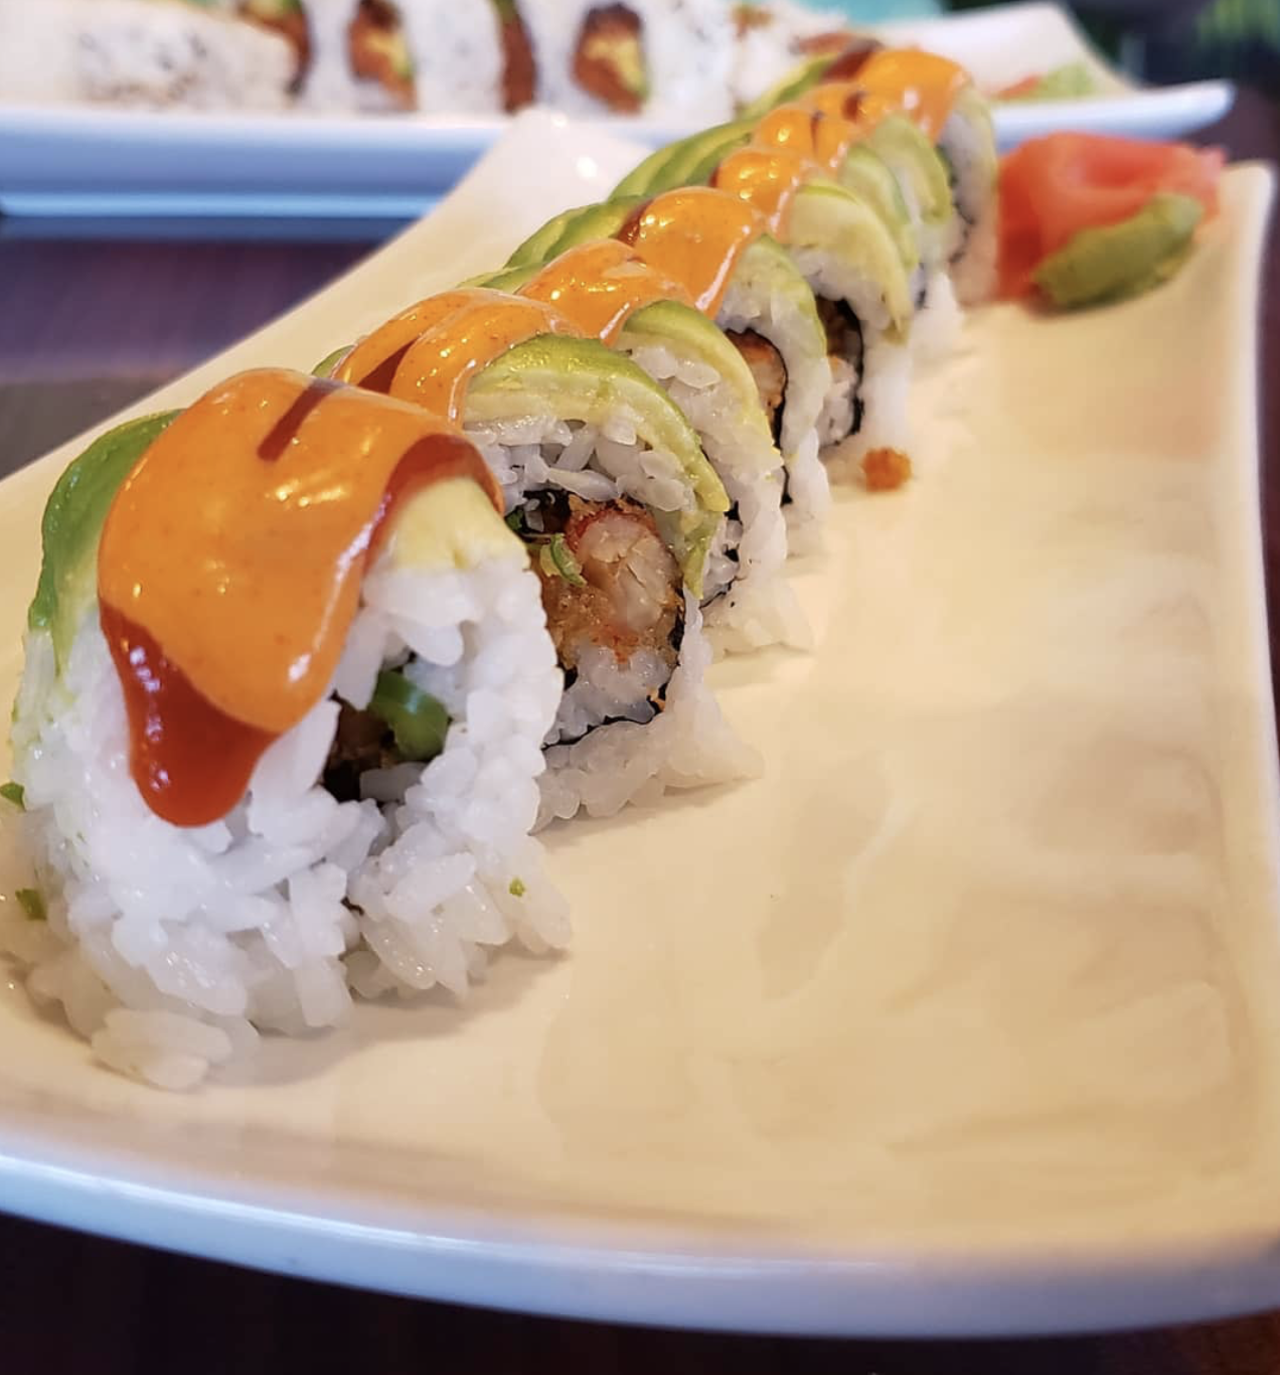 Sushi Express Stone Oak
19903 Stone Oak Pkwy Ste 208, PHONE, facebook.com/SushiExpressStoneOak/
This sushi spot offers a wide range of rolls, plus Japanese and Korean entrees in a cozy setting. Try the San Antonio roll! 
Photo via Instagram /  msjaymemikayla